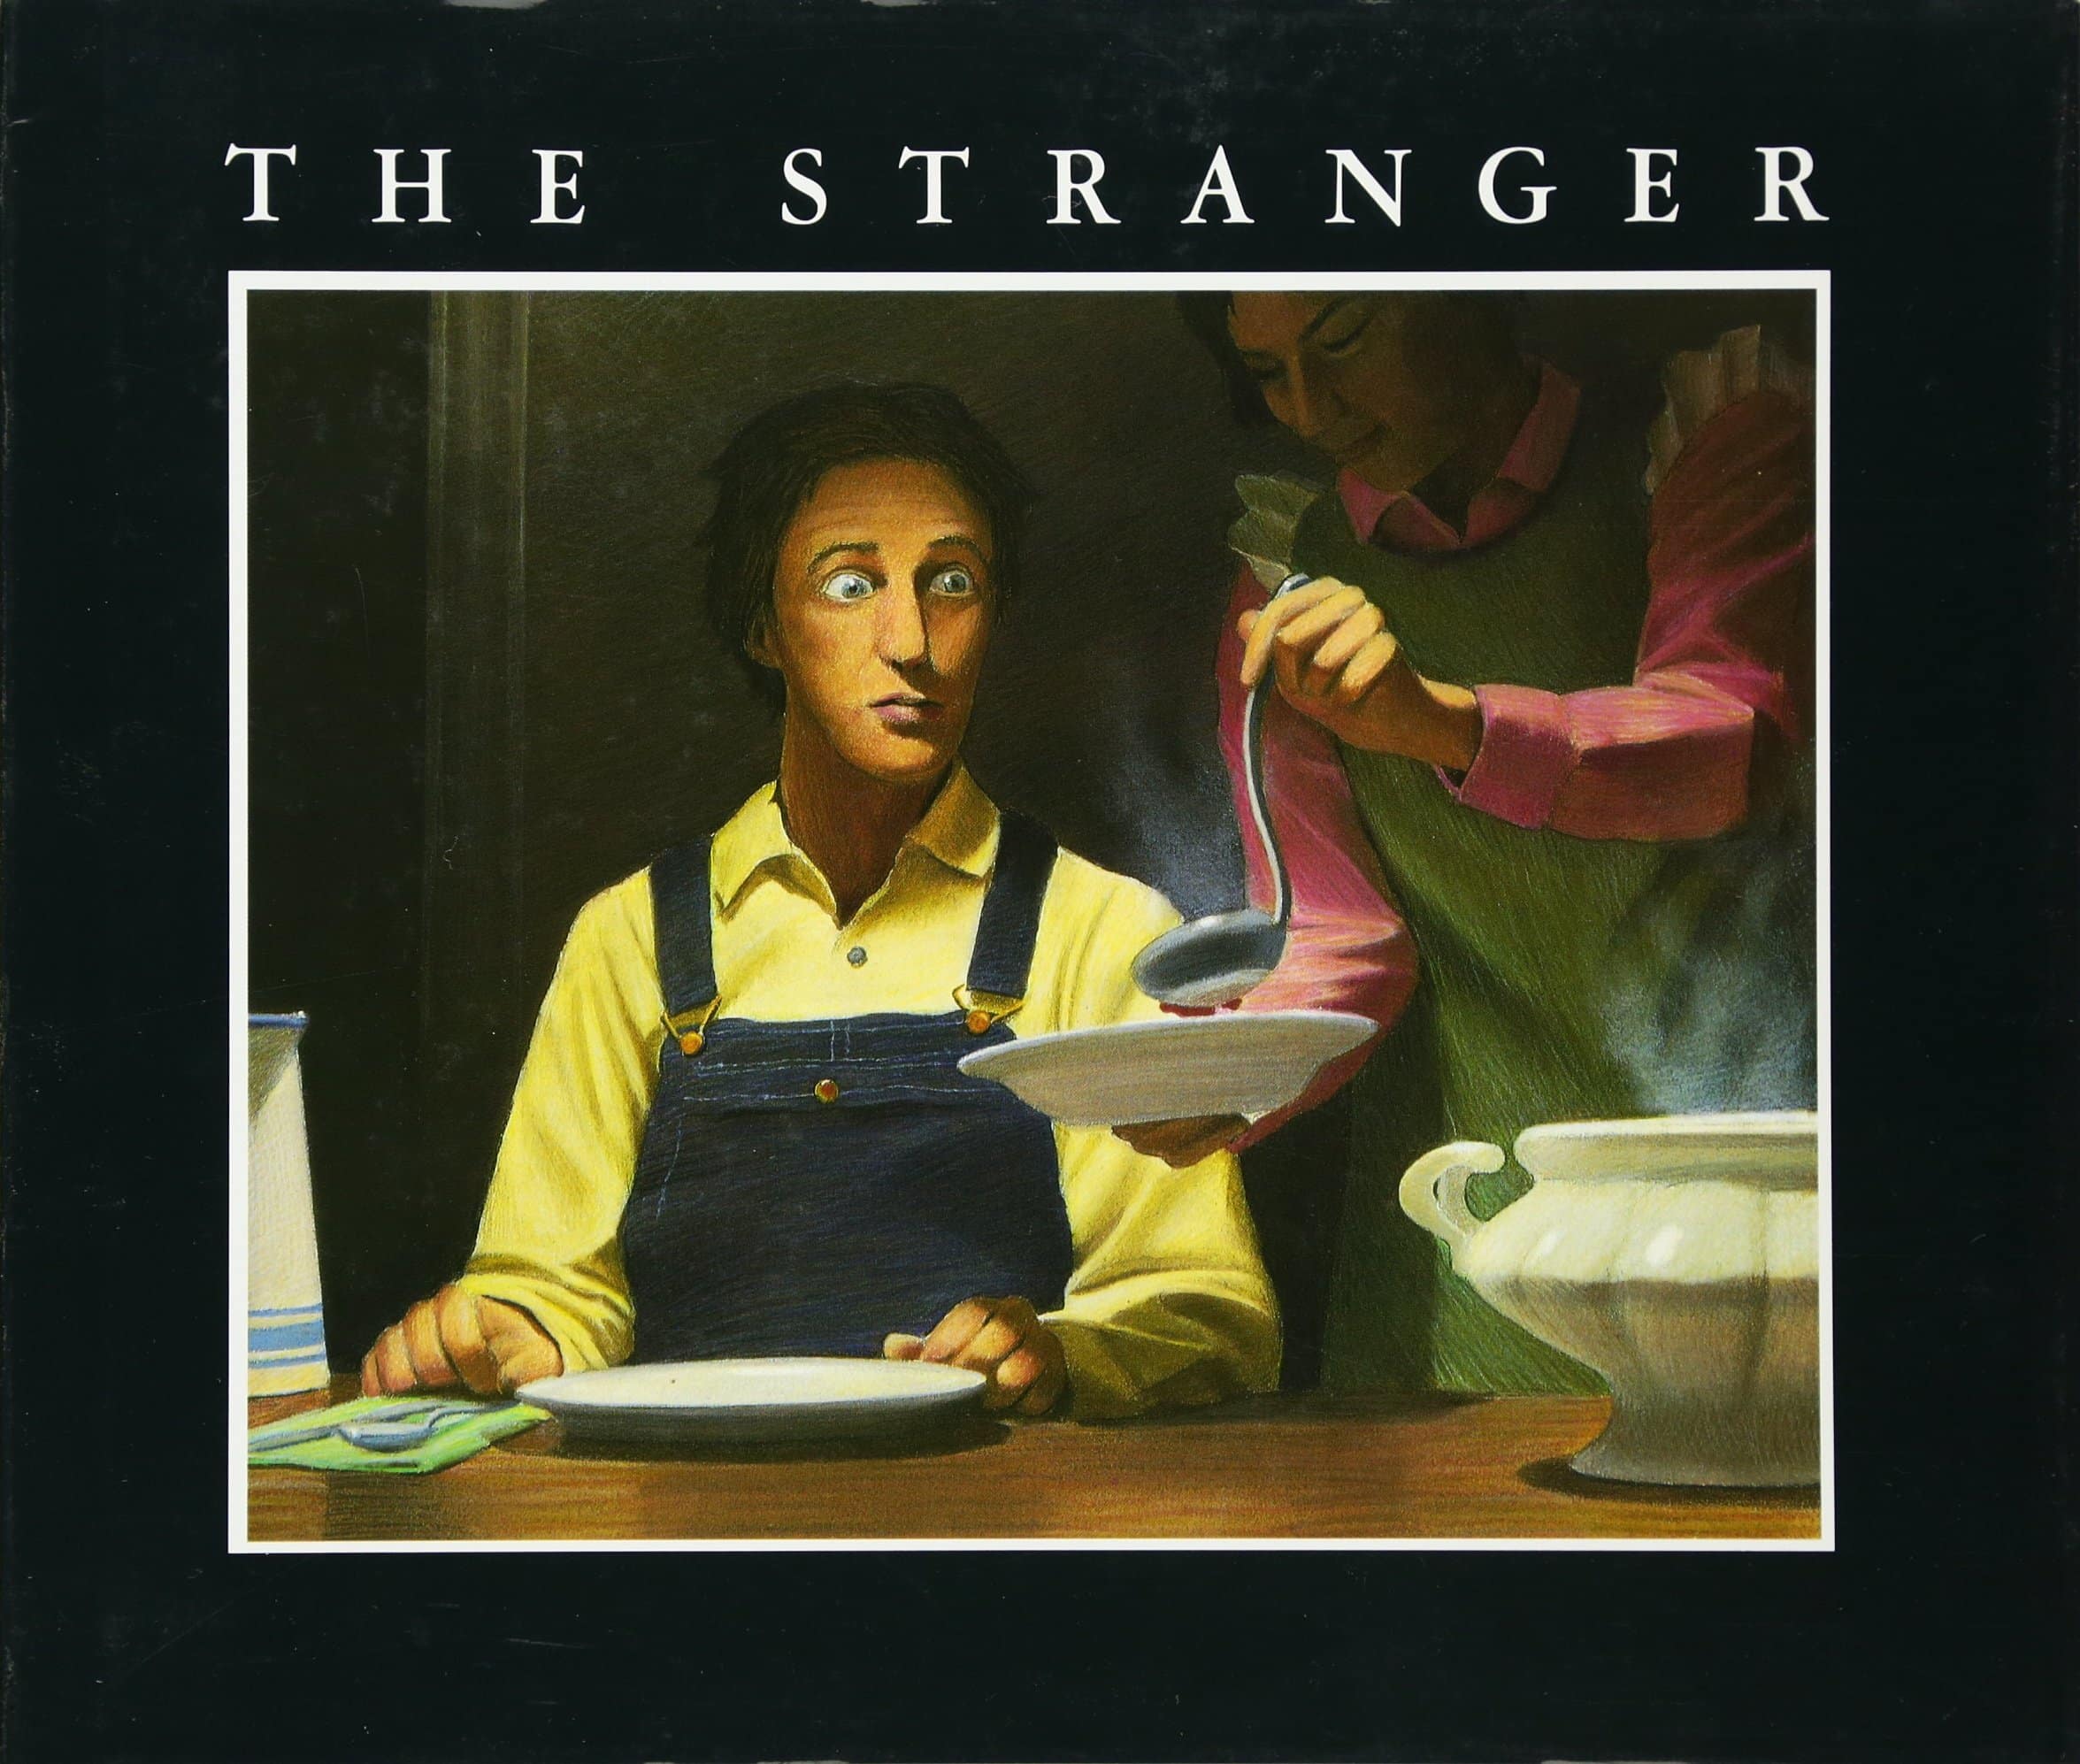 The cover for the book The Stranger